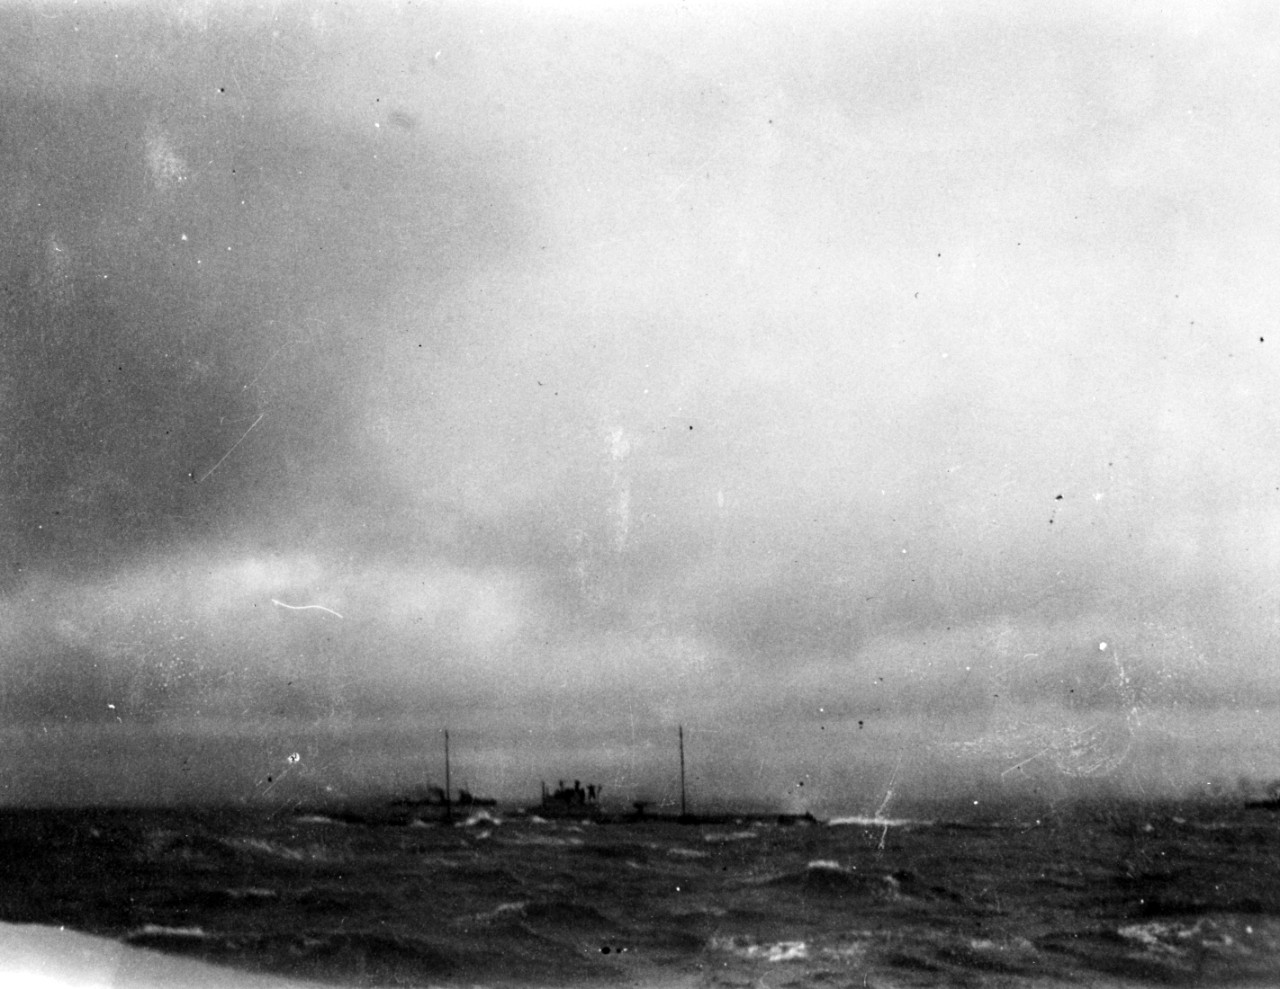 Unidentified German submarine at sea in about 1915-1916